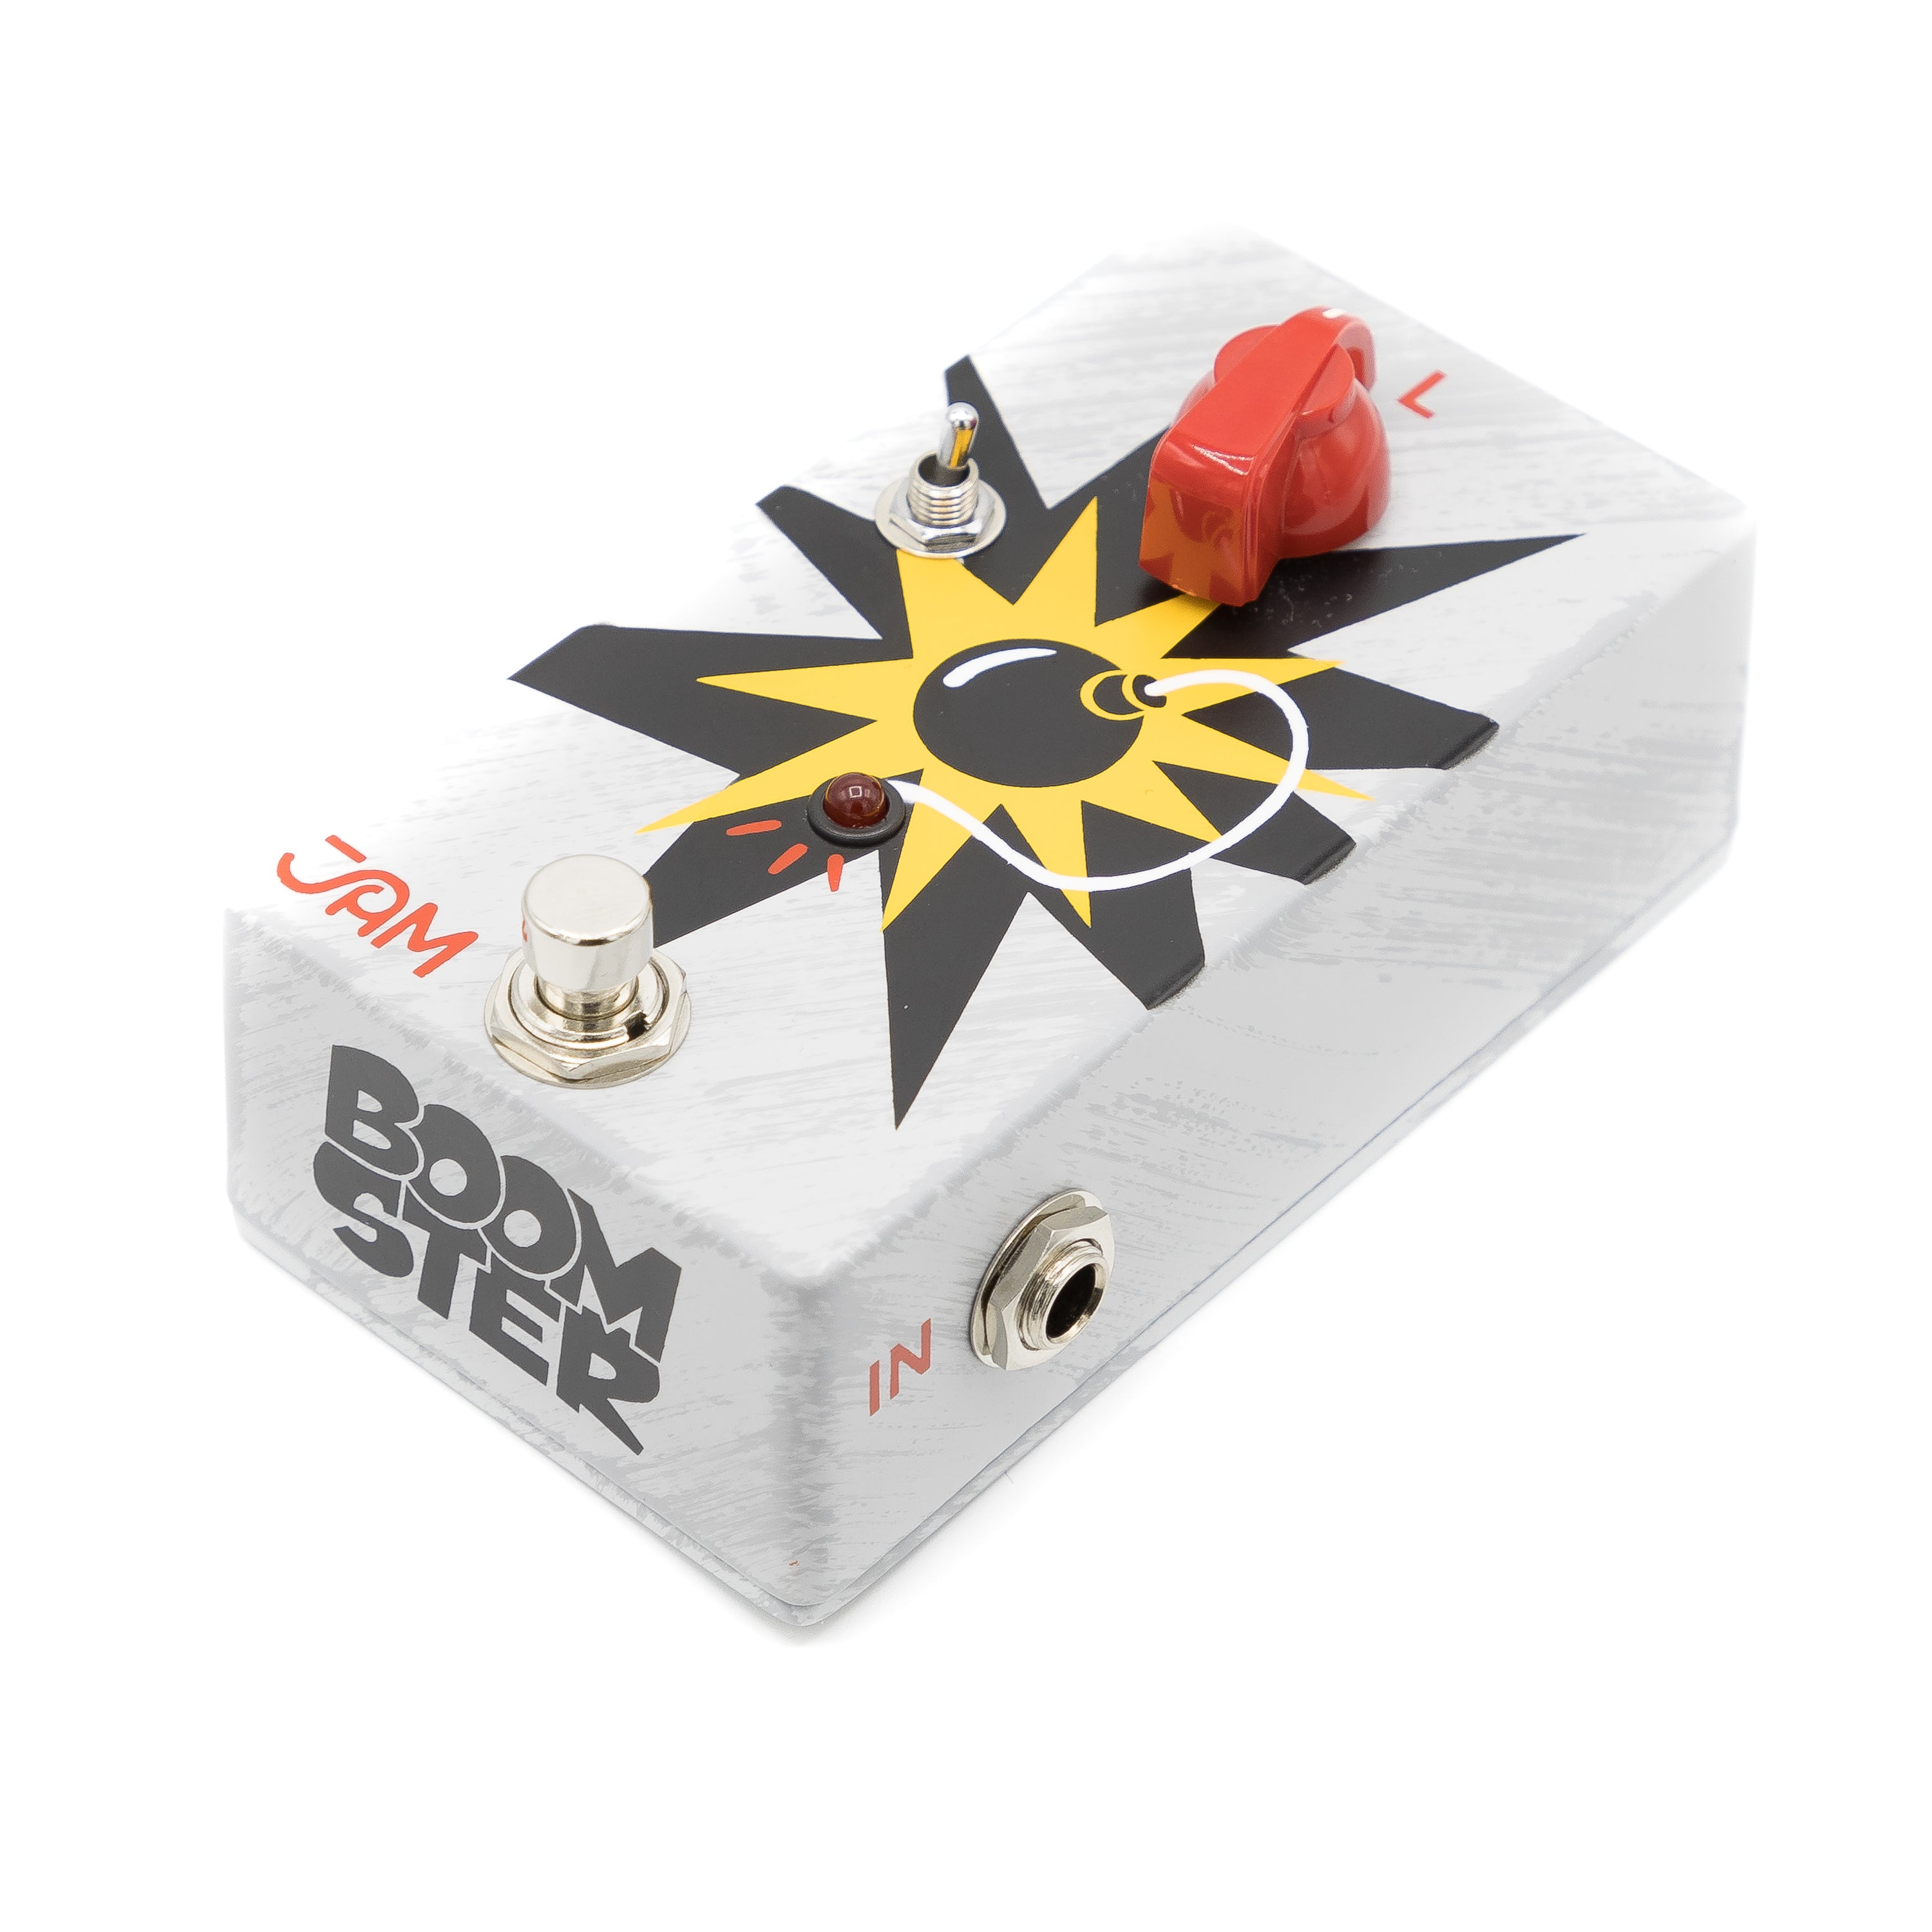 JAM Pedals - Boomster mk.2